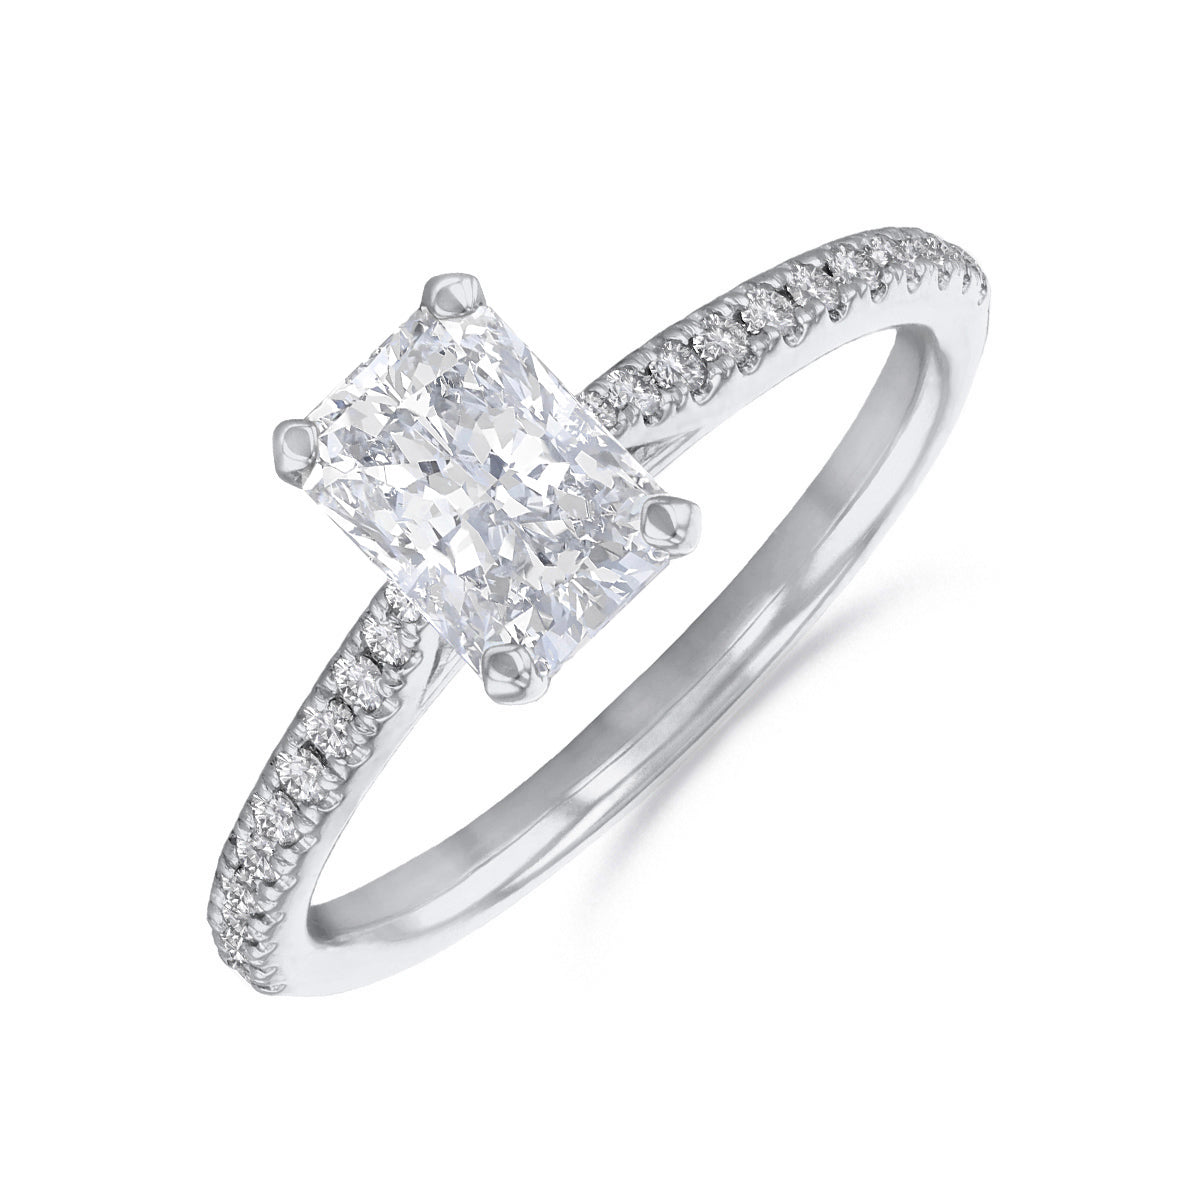 1-20ct-ophelia-shoulder-set-radiant-cut-solitaire-diamond-engagement-ring-18ct-white-gold